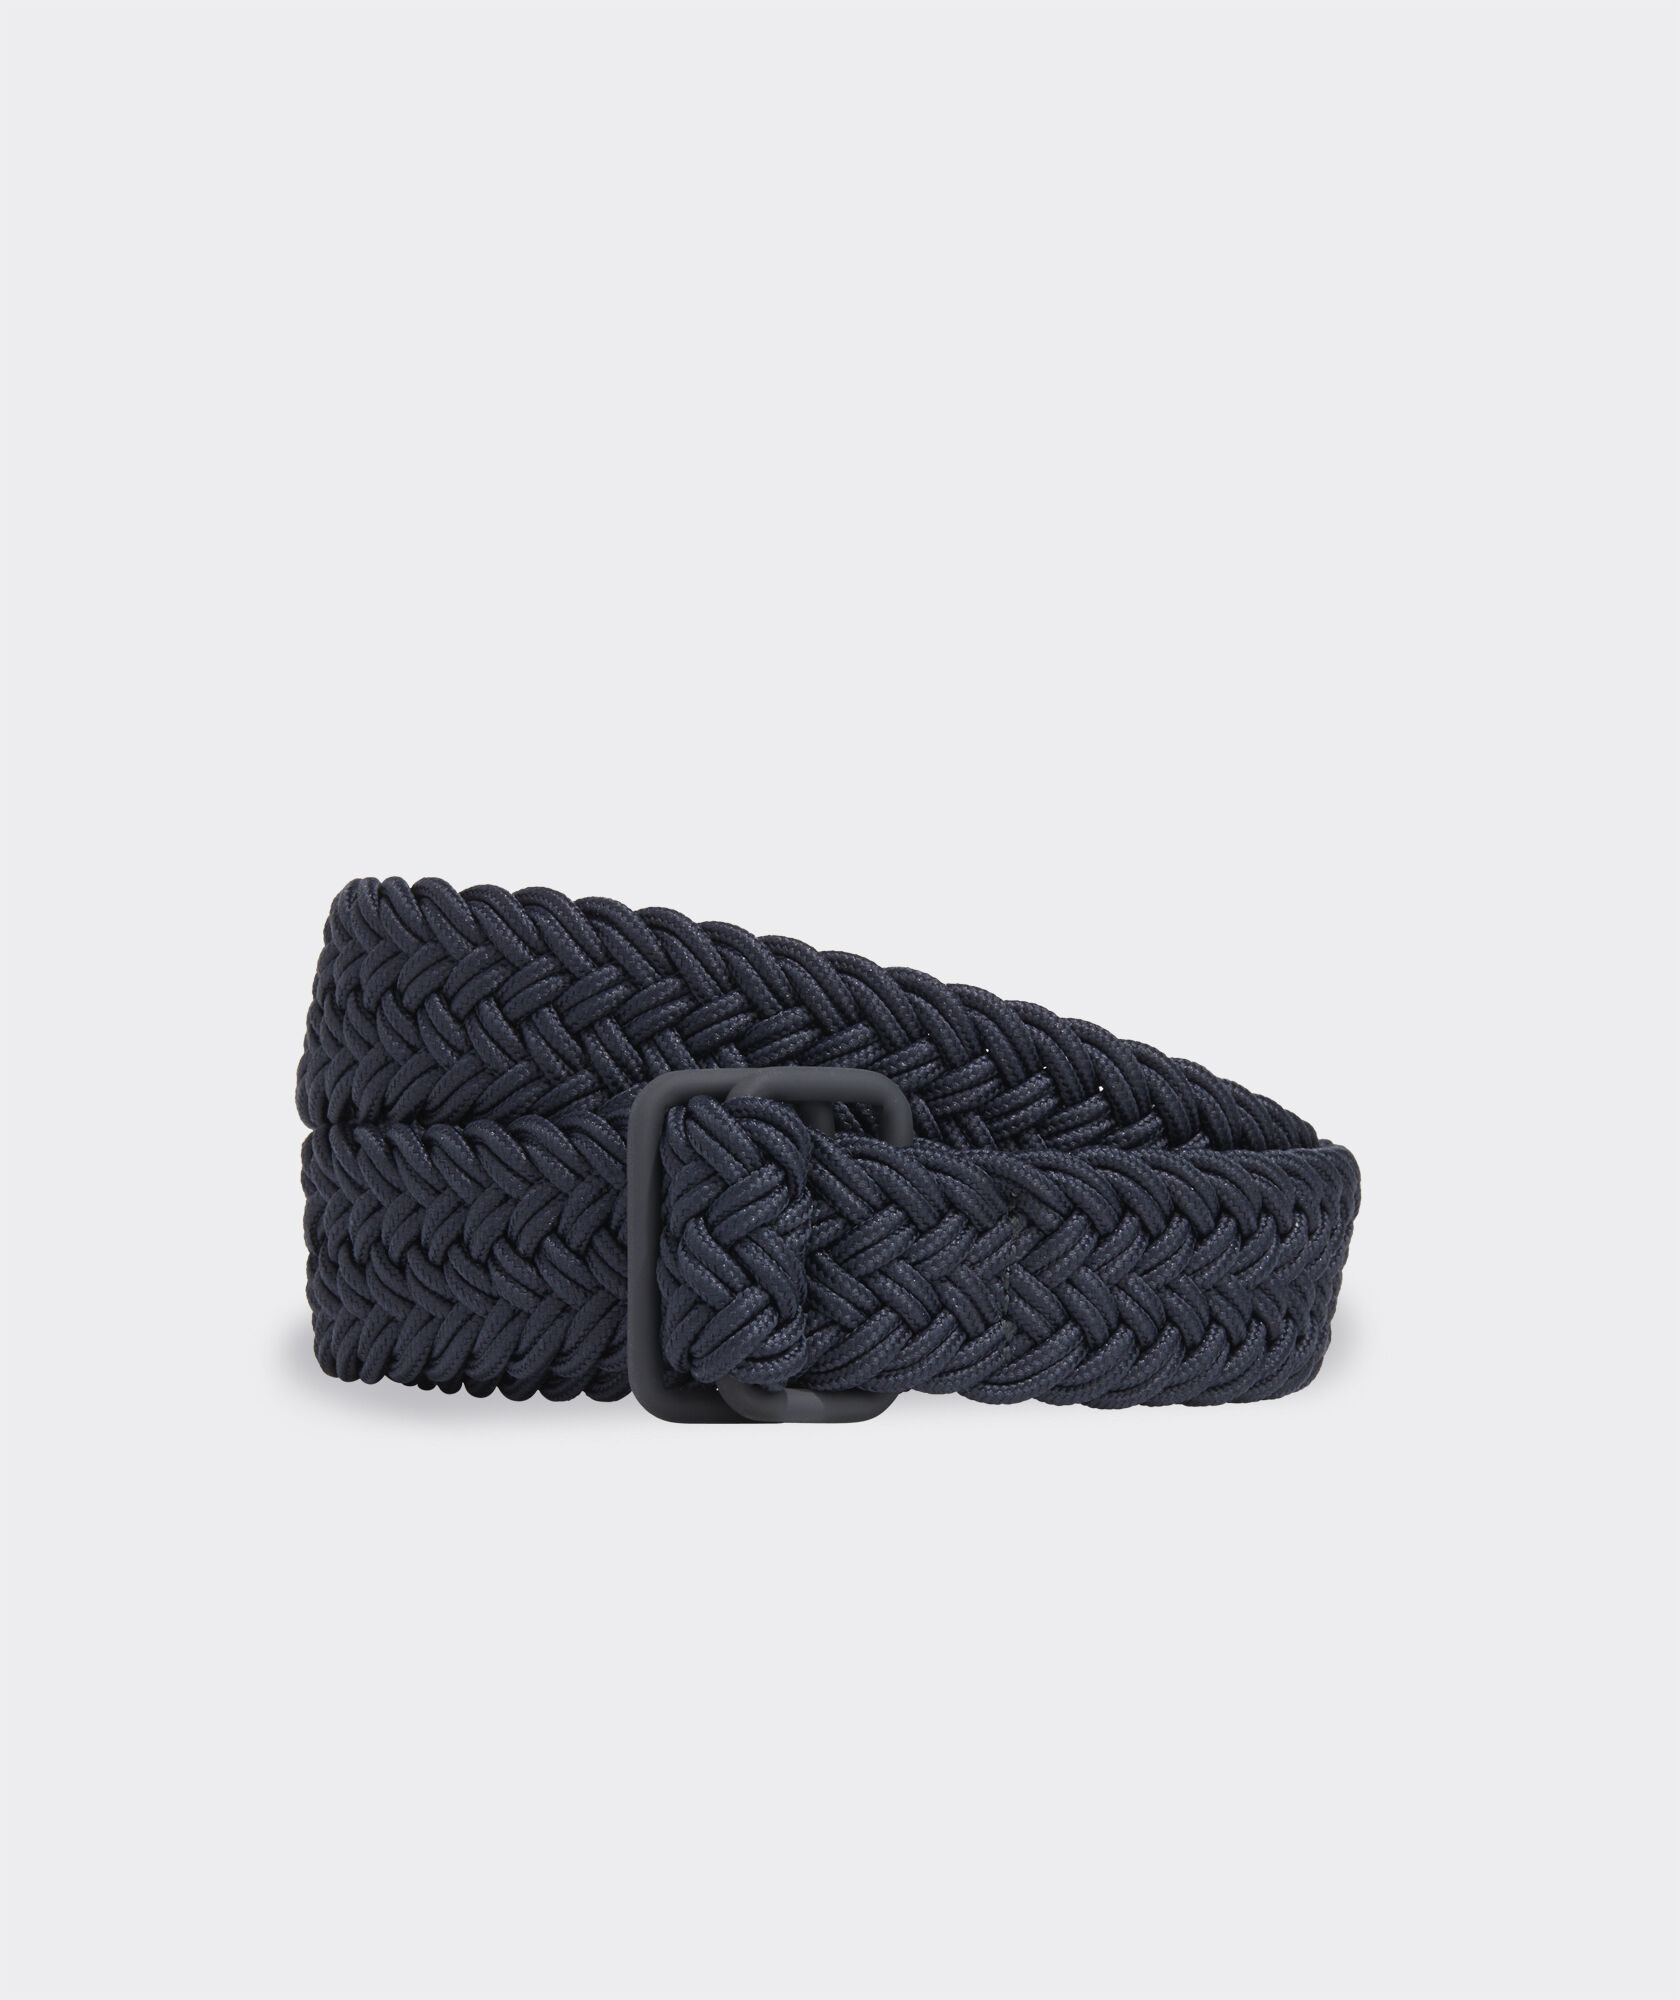 On-The-Go Braided D-Ring Belt